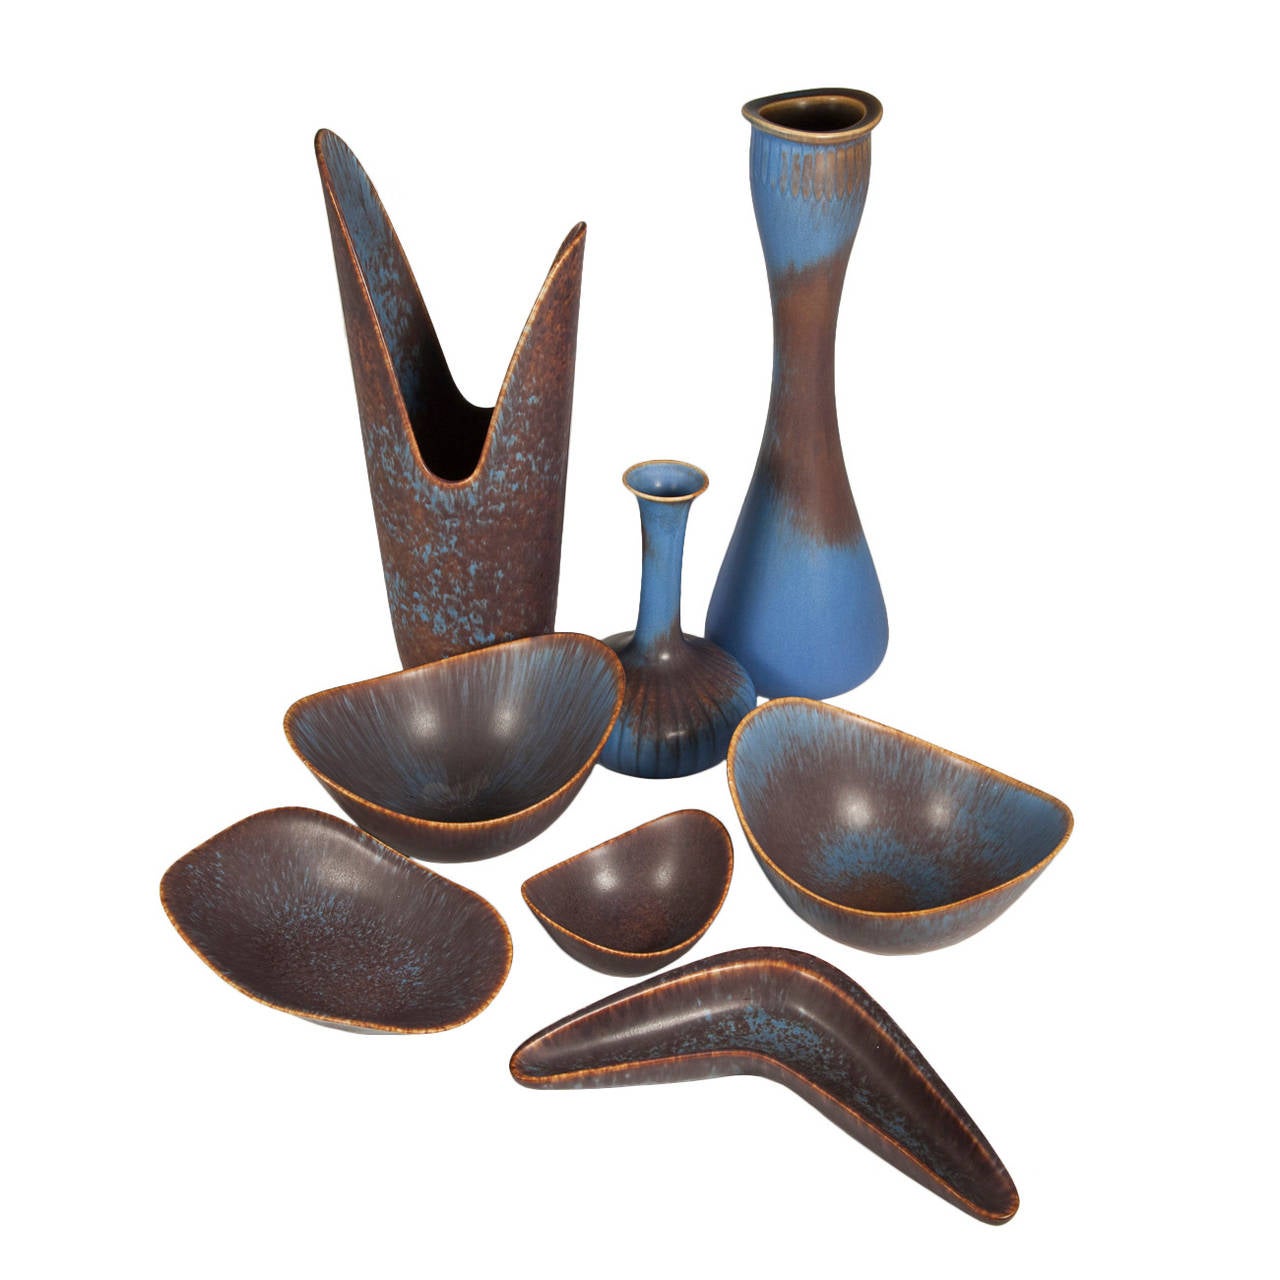 A great collection of Gunnar Nylund ceramics for Rorstrand with a stunning blue/brown haresfur glaze. Can be purchased individually. Maker's mark and signature on bottom. One of the larger bowls has been sold (see below).

Vase (left): 5